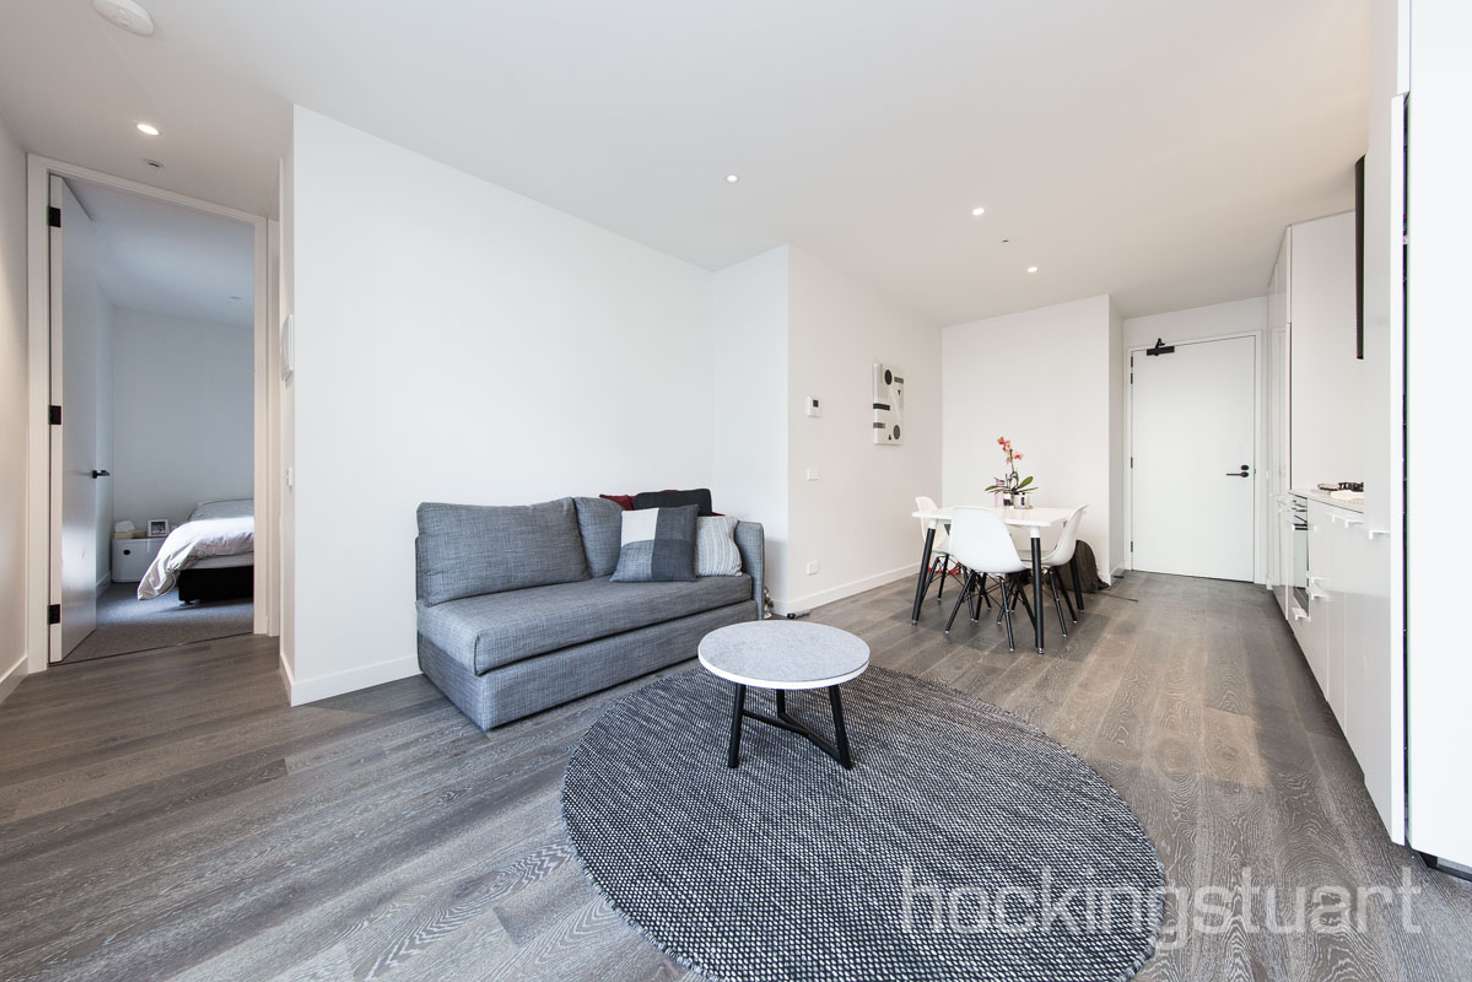 Main view of Homely house listing, 206/518 Swanston Street, Carlton VIC 3053